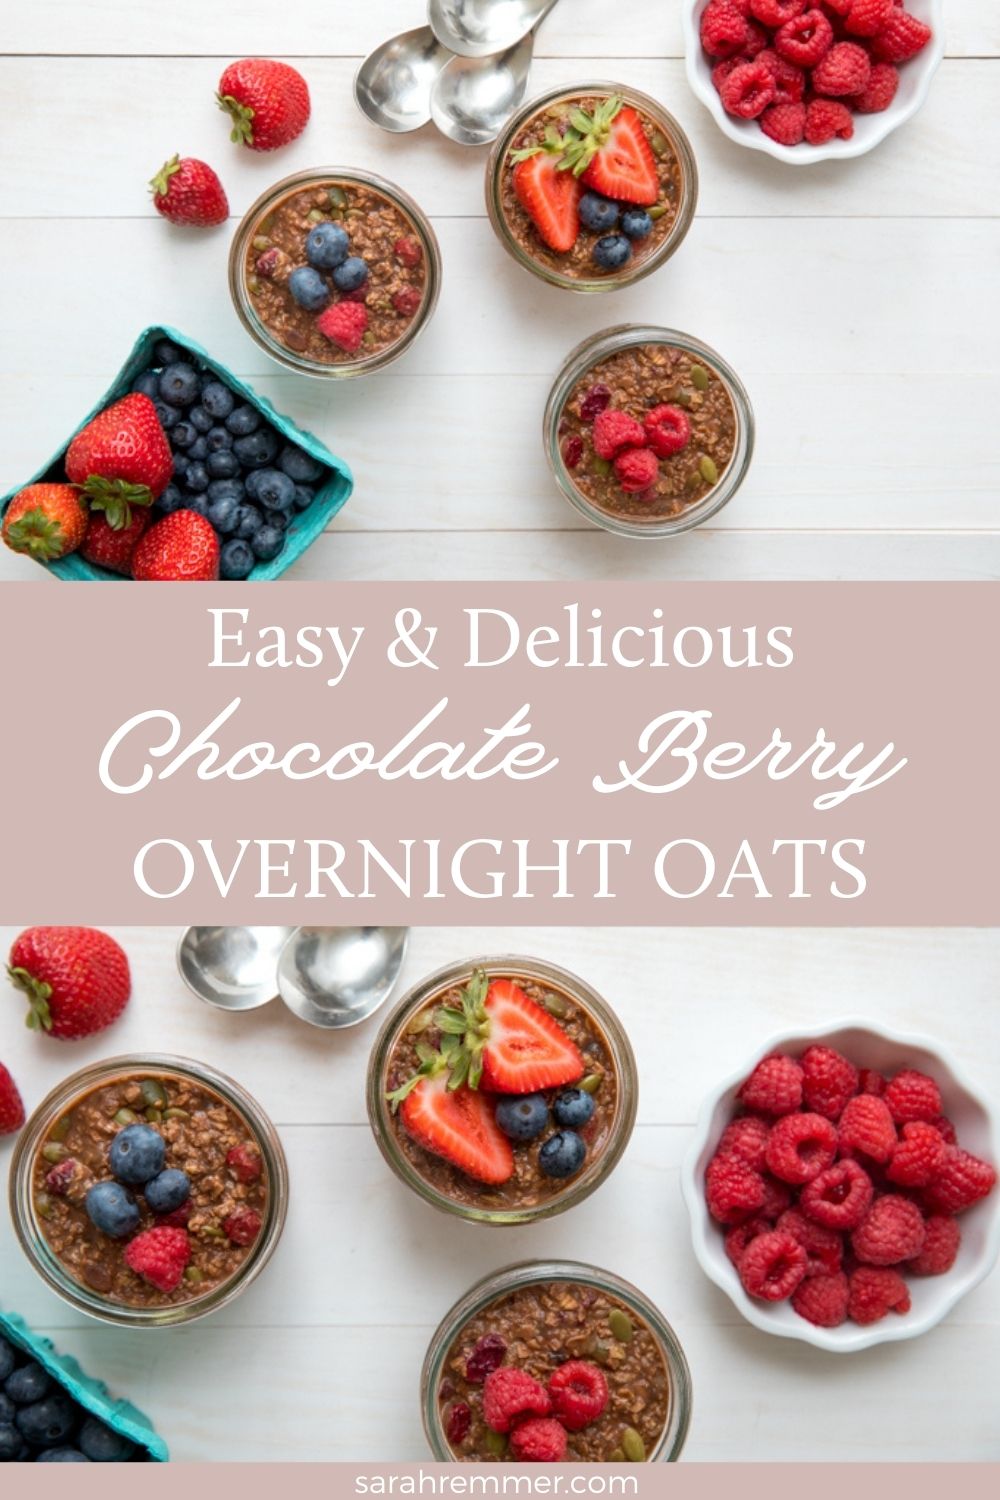 This chocolatey overnight oatmeal recipe is just as nutritious as it is delicious. Your kids will feel like they’re having a treat! Top with berries of your choice, and you’ve got yourself a balanced breakfast!  